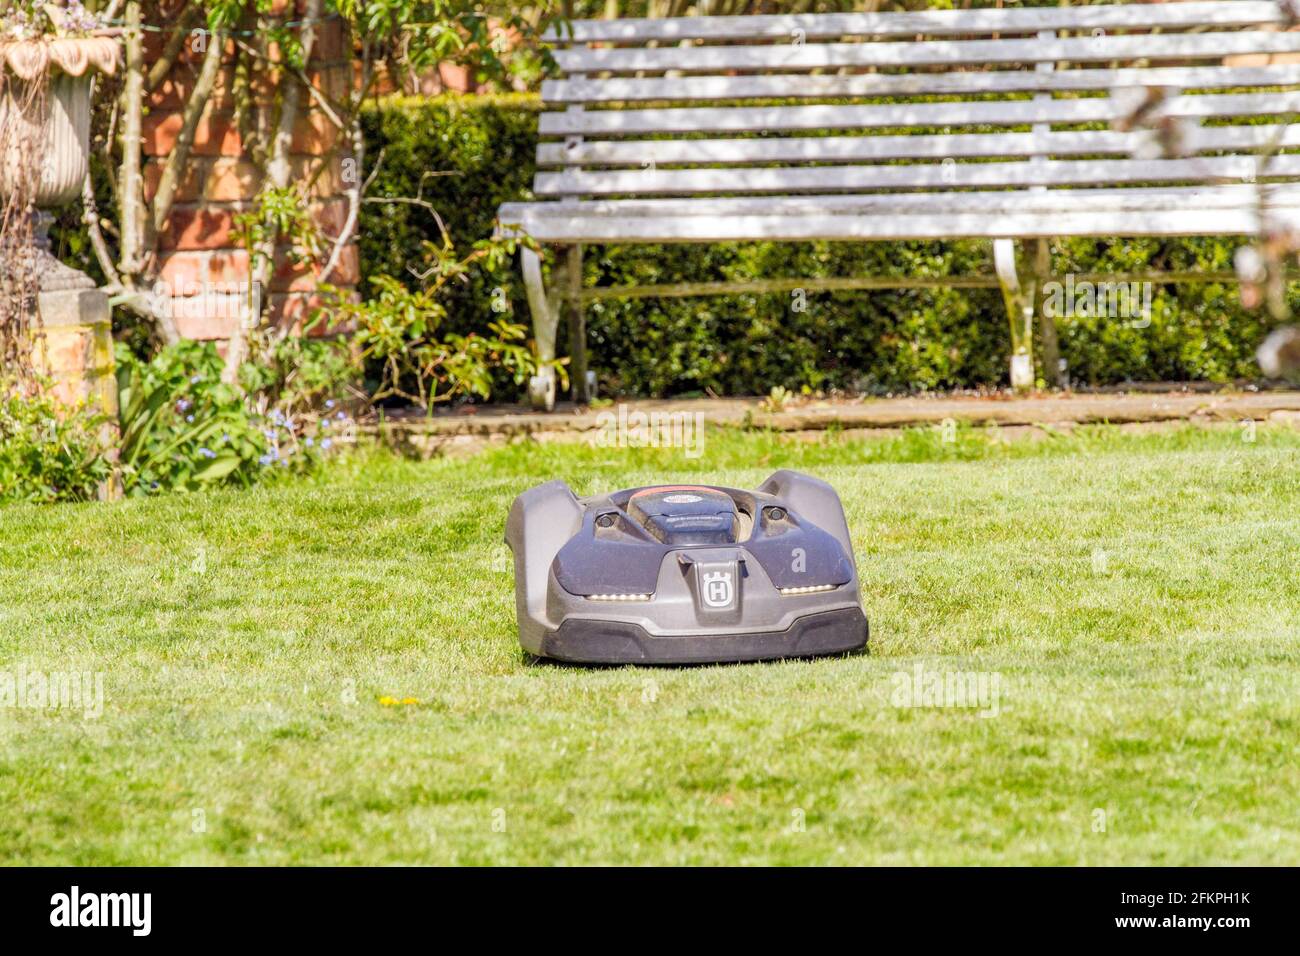 Husqvarna robotic robot  automatic lawn mower in use in an English country garden mowing and cutting  a grass lawn Stock Photo